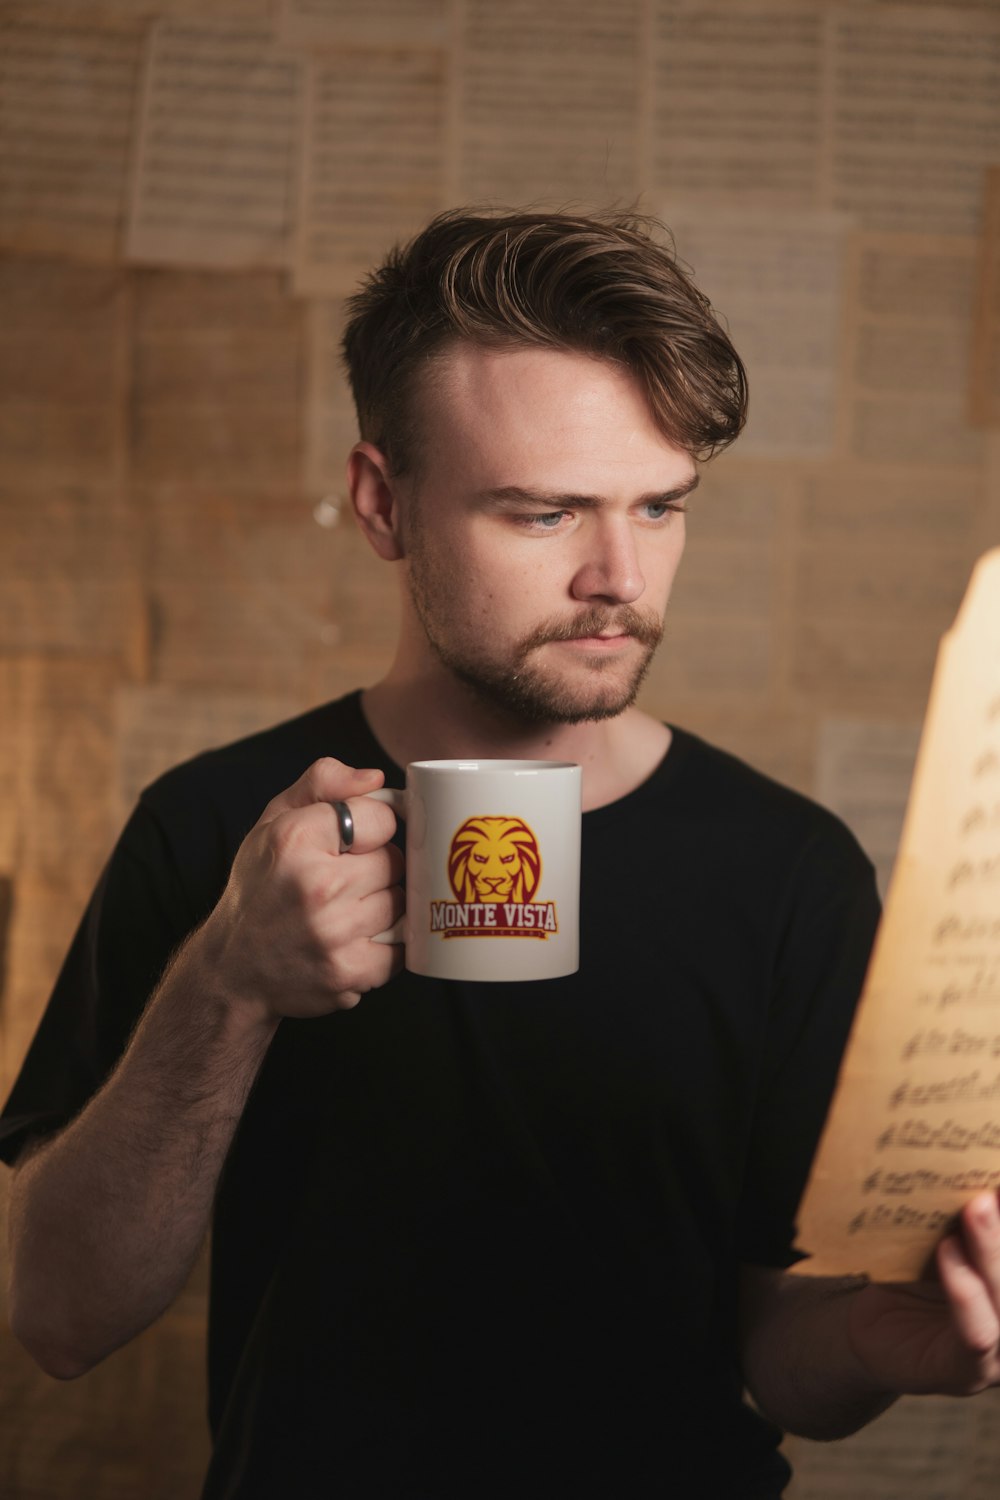 a man holding a coffee mug and a piece of paper